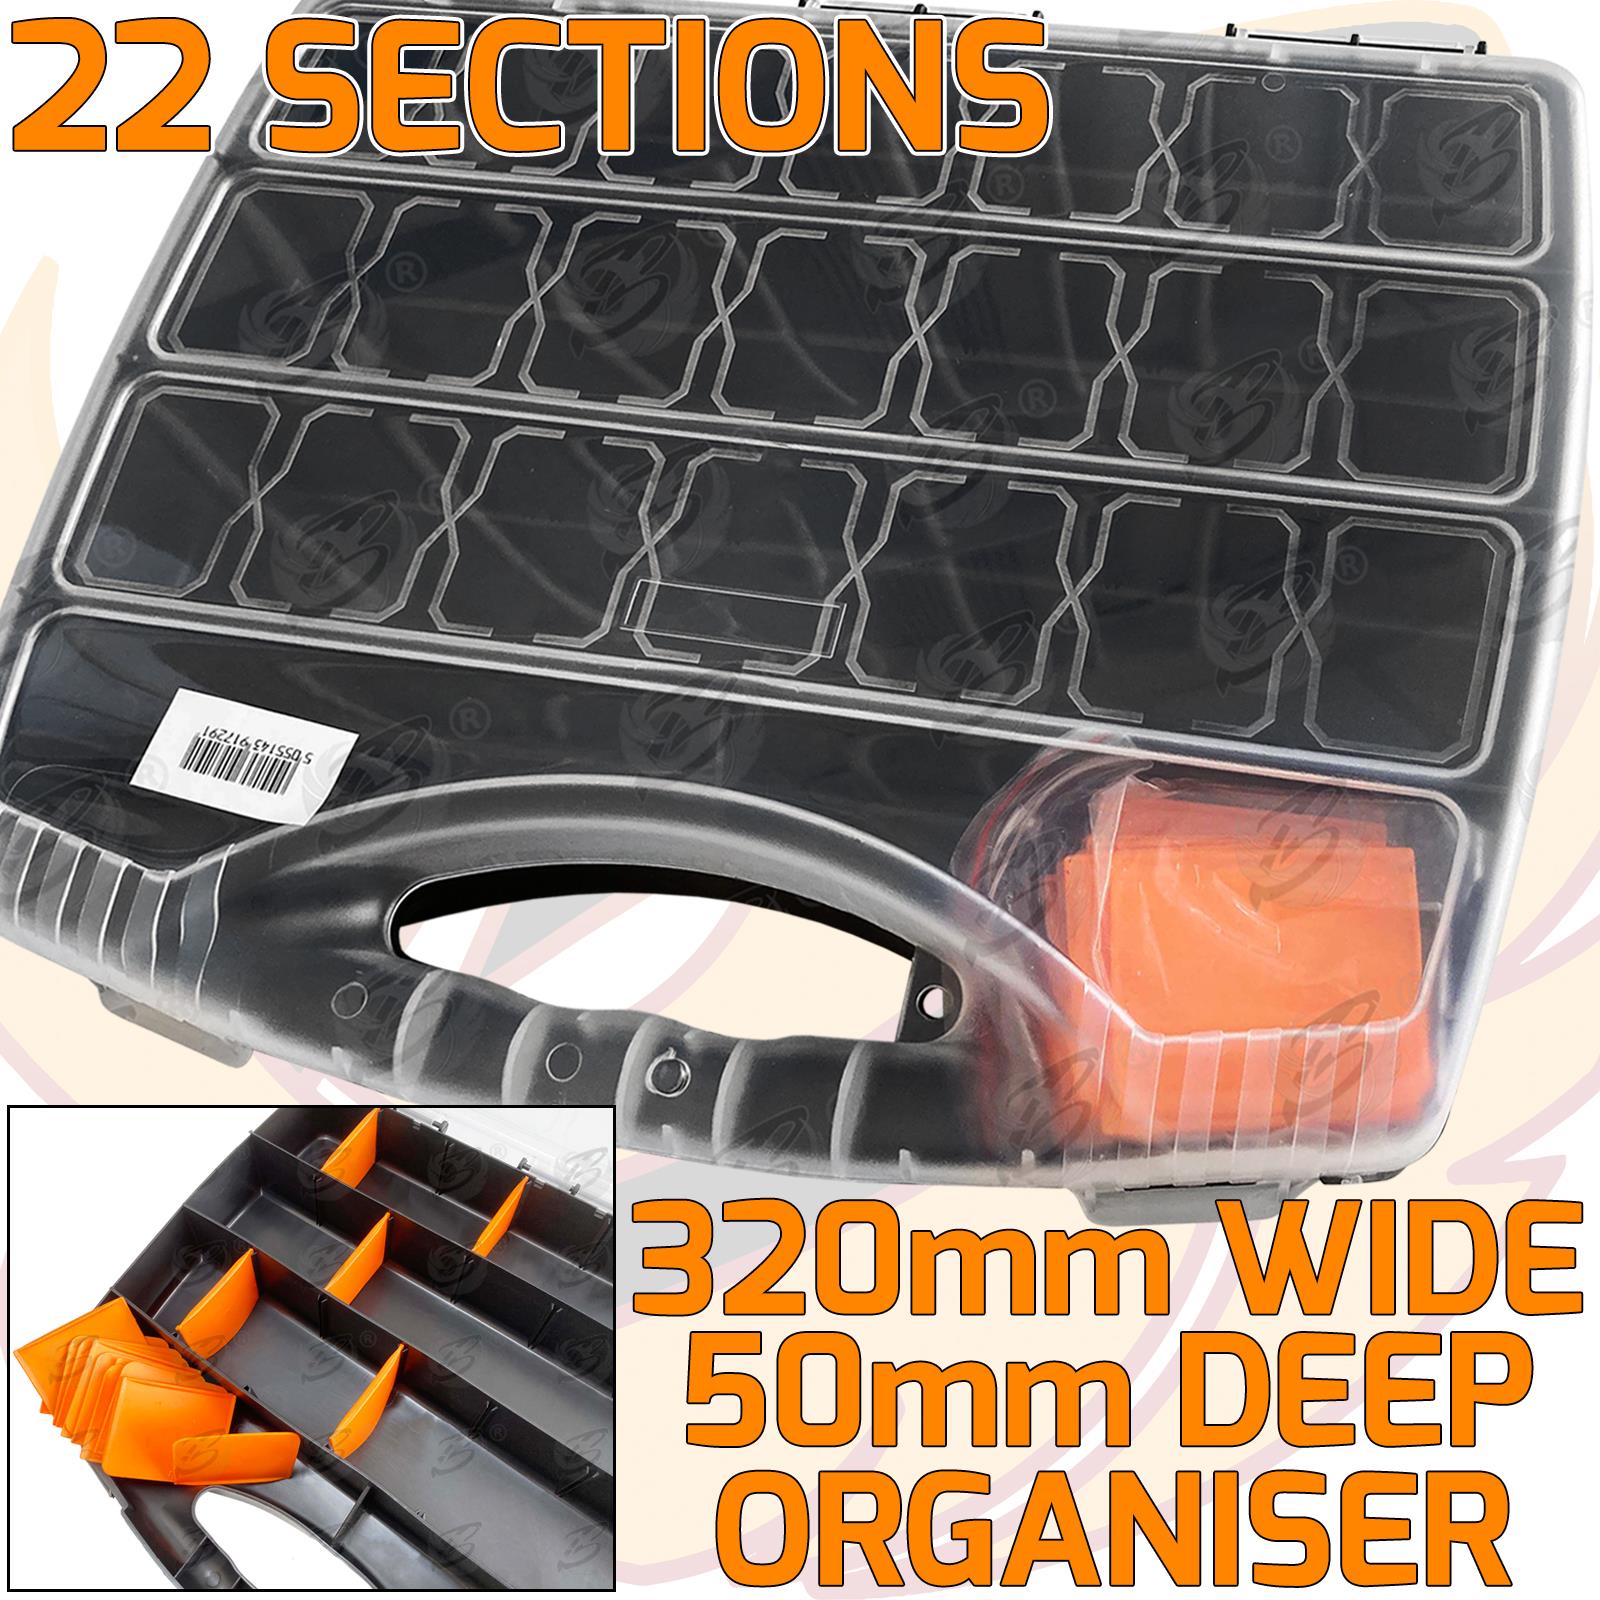 TOOLZONE DIY ORGANISER 22 COMPARTMENTS ( 320MM WIDE )